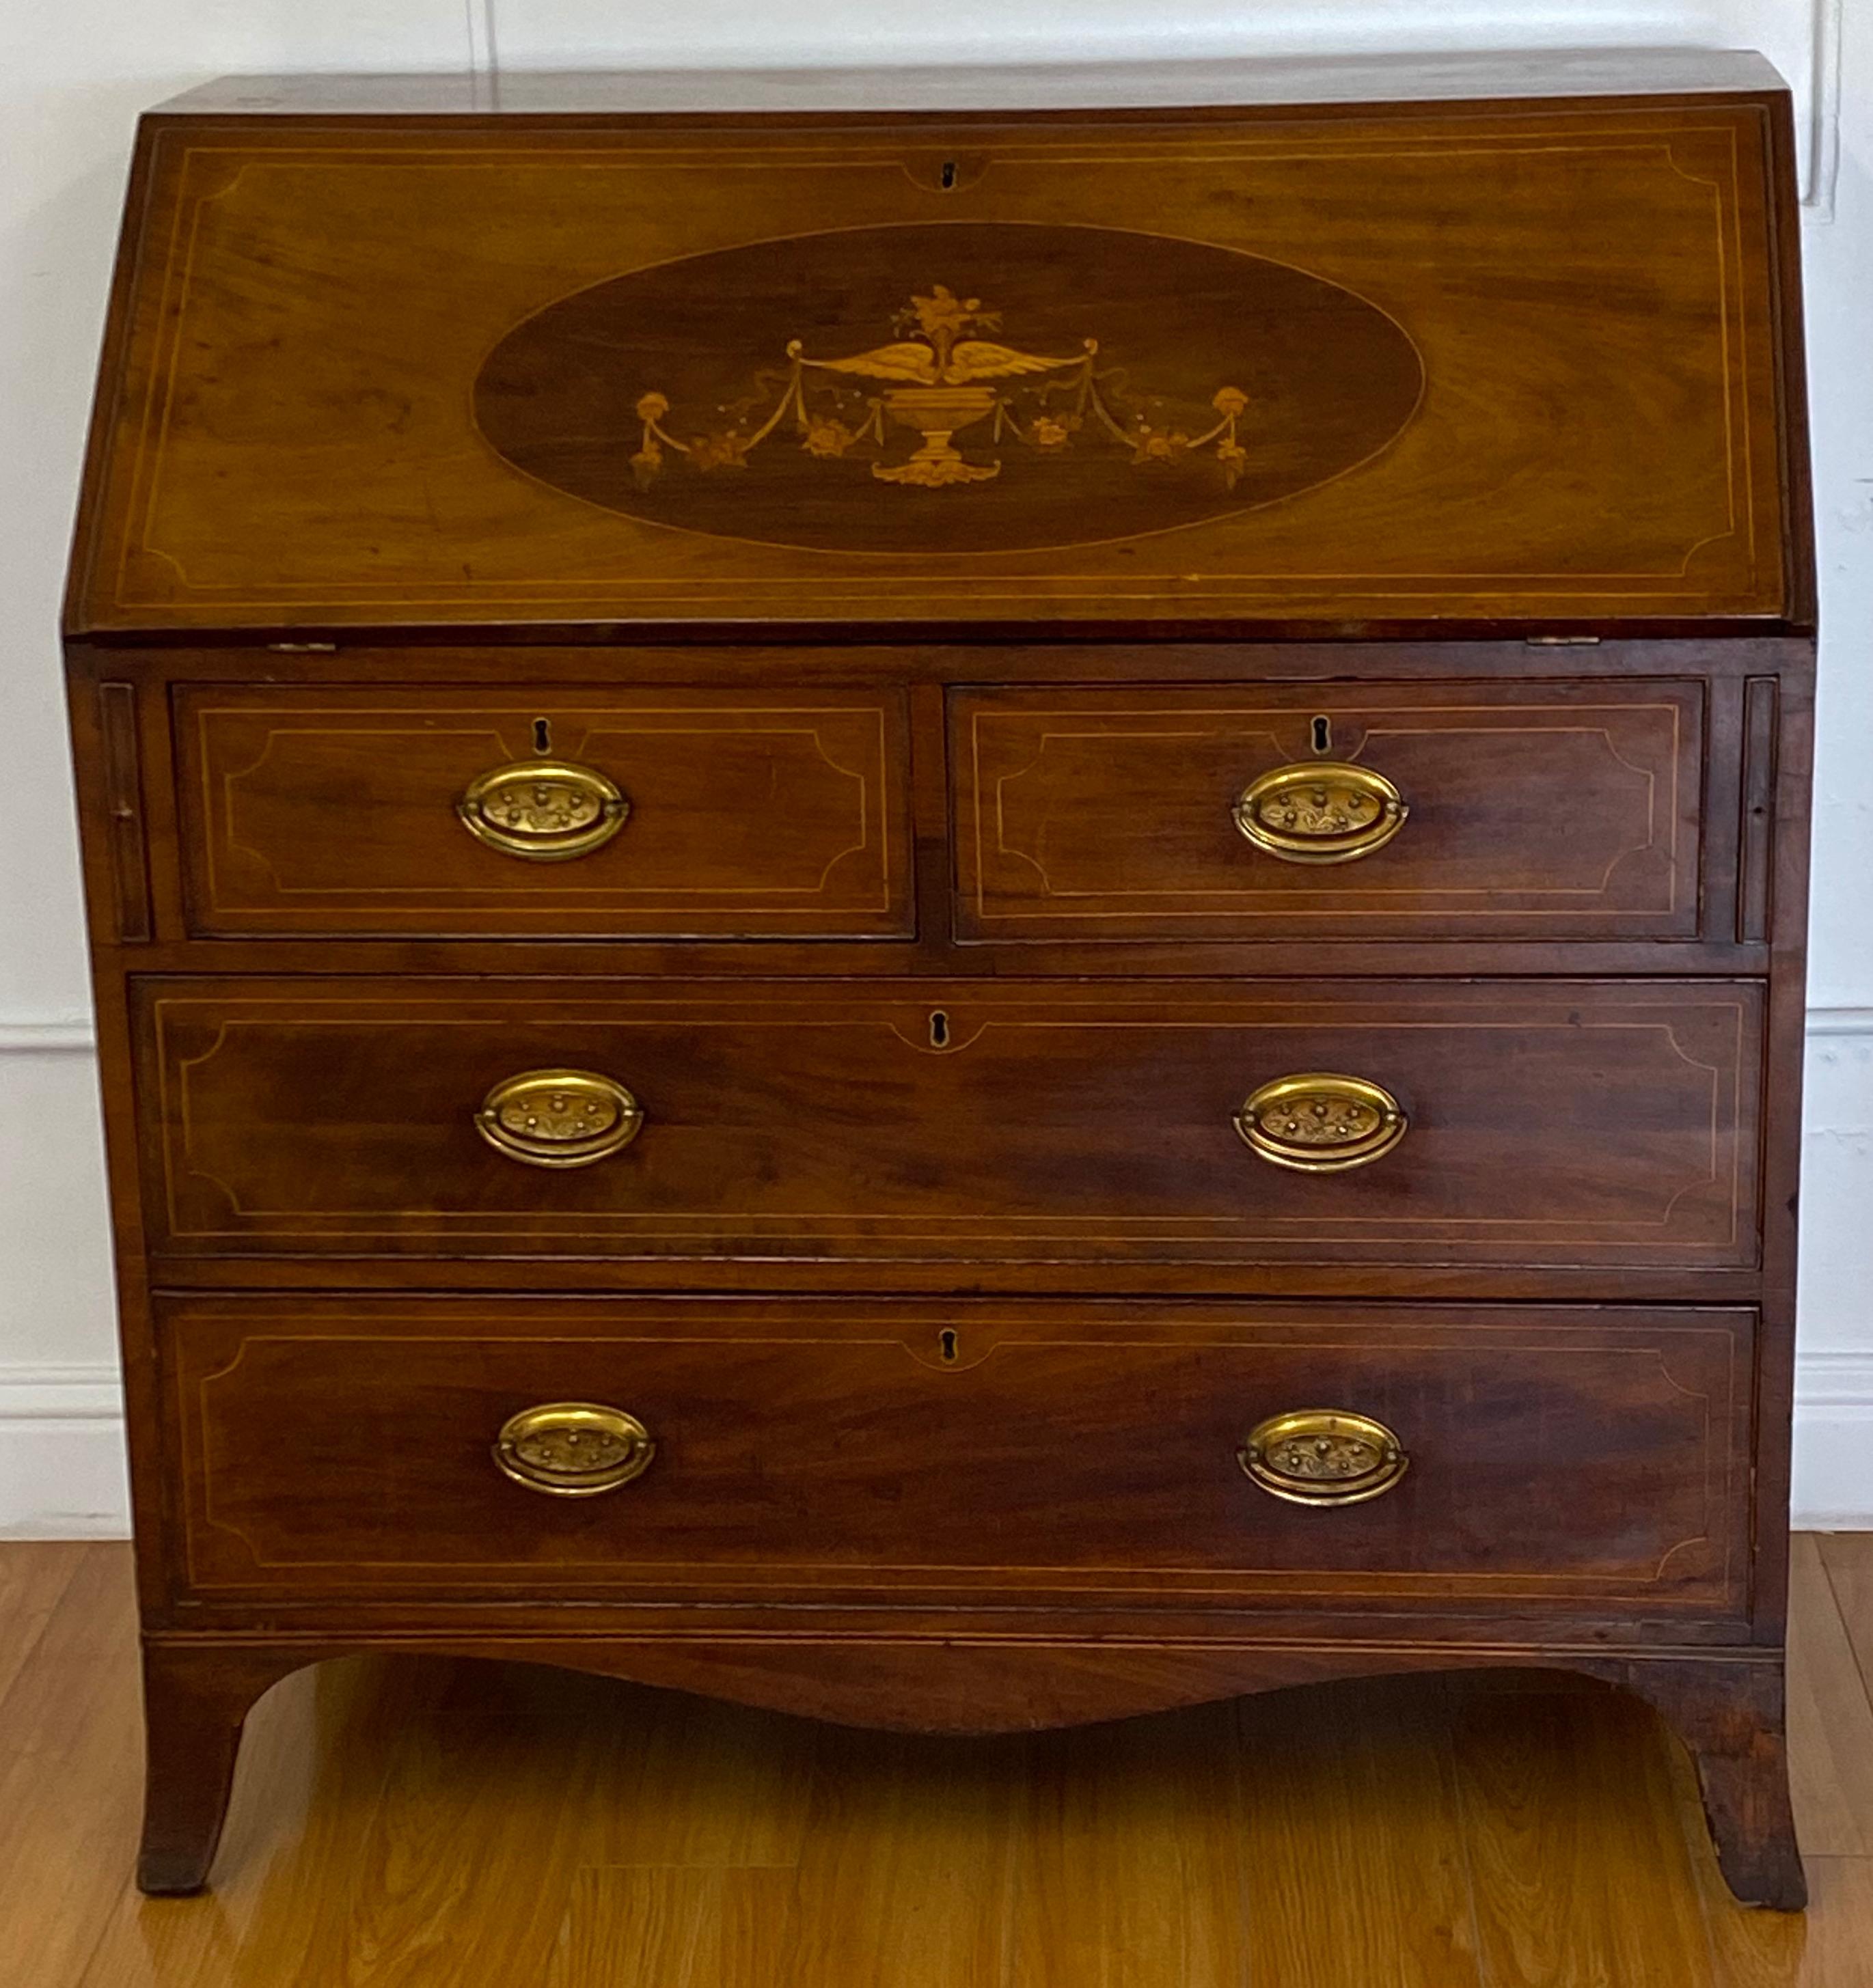 19th century walnut & mahogany drop front bureau desk

Gorgeous antique drop front bureau with fitted interior

The small footprint and large desk surface makes this a great laptop desk for the 21st century

The beautiful inlay work shows a